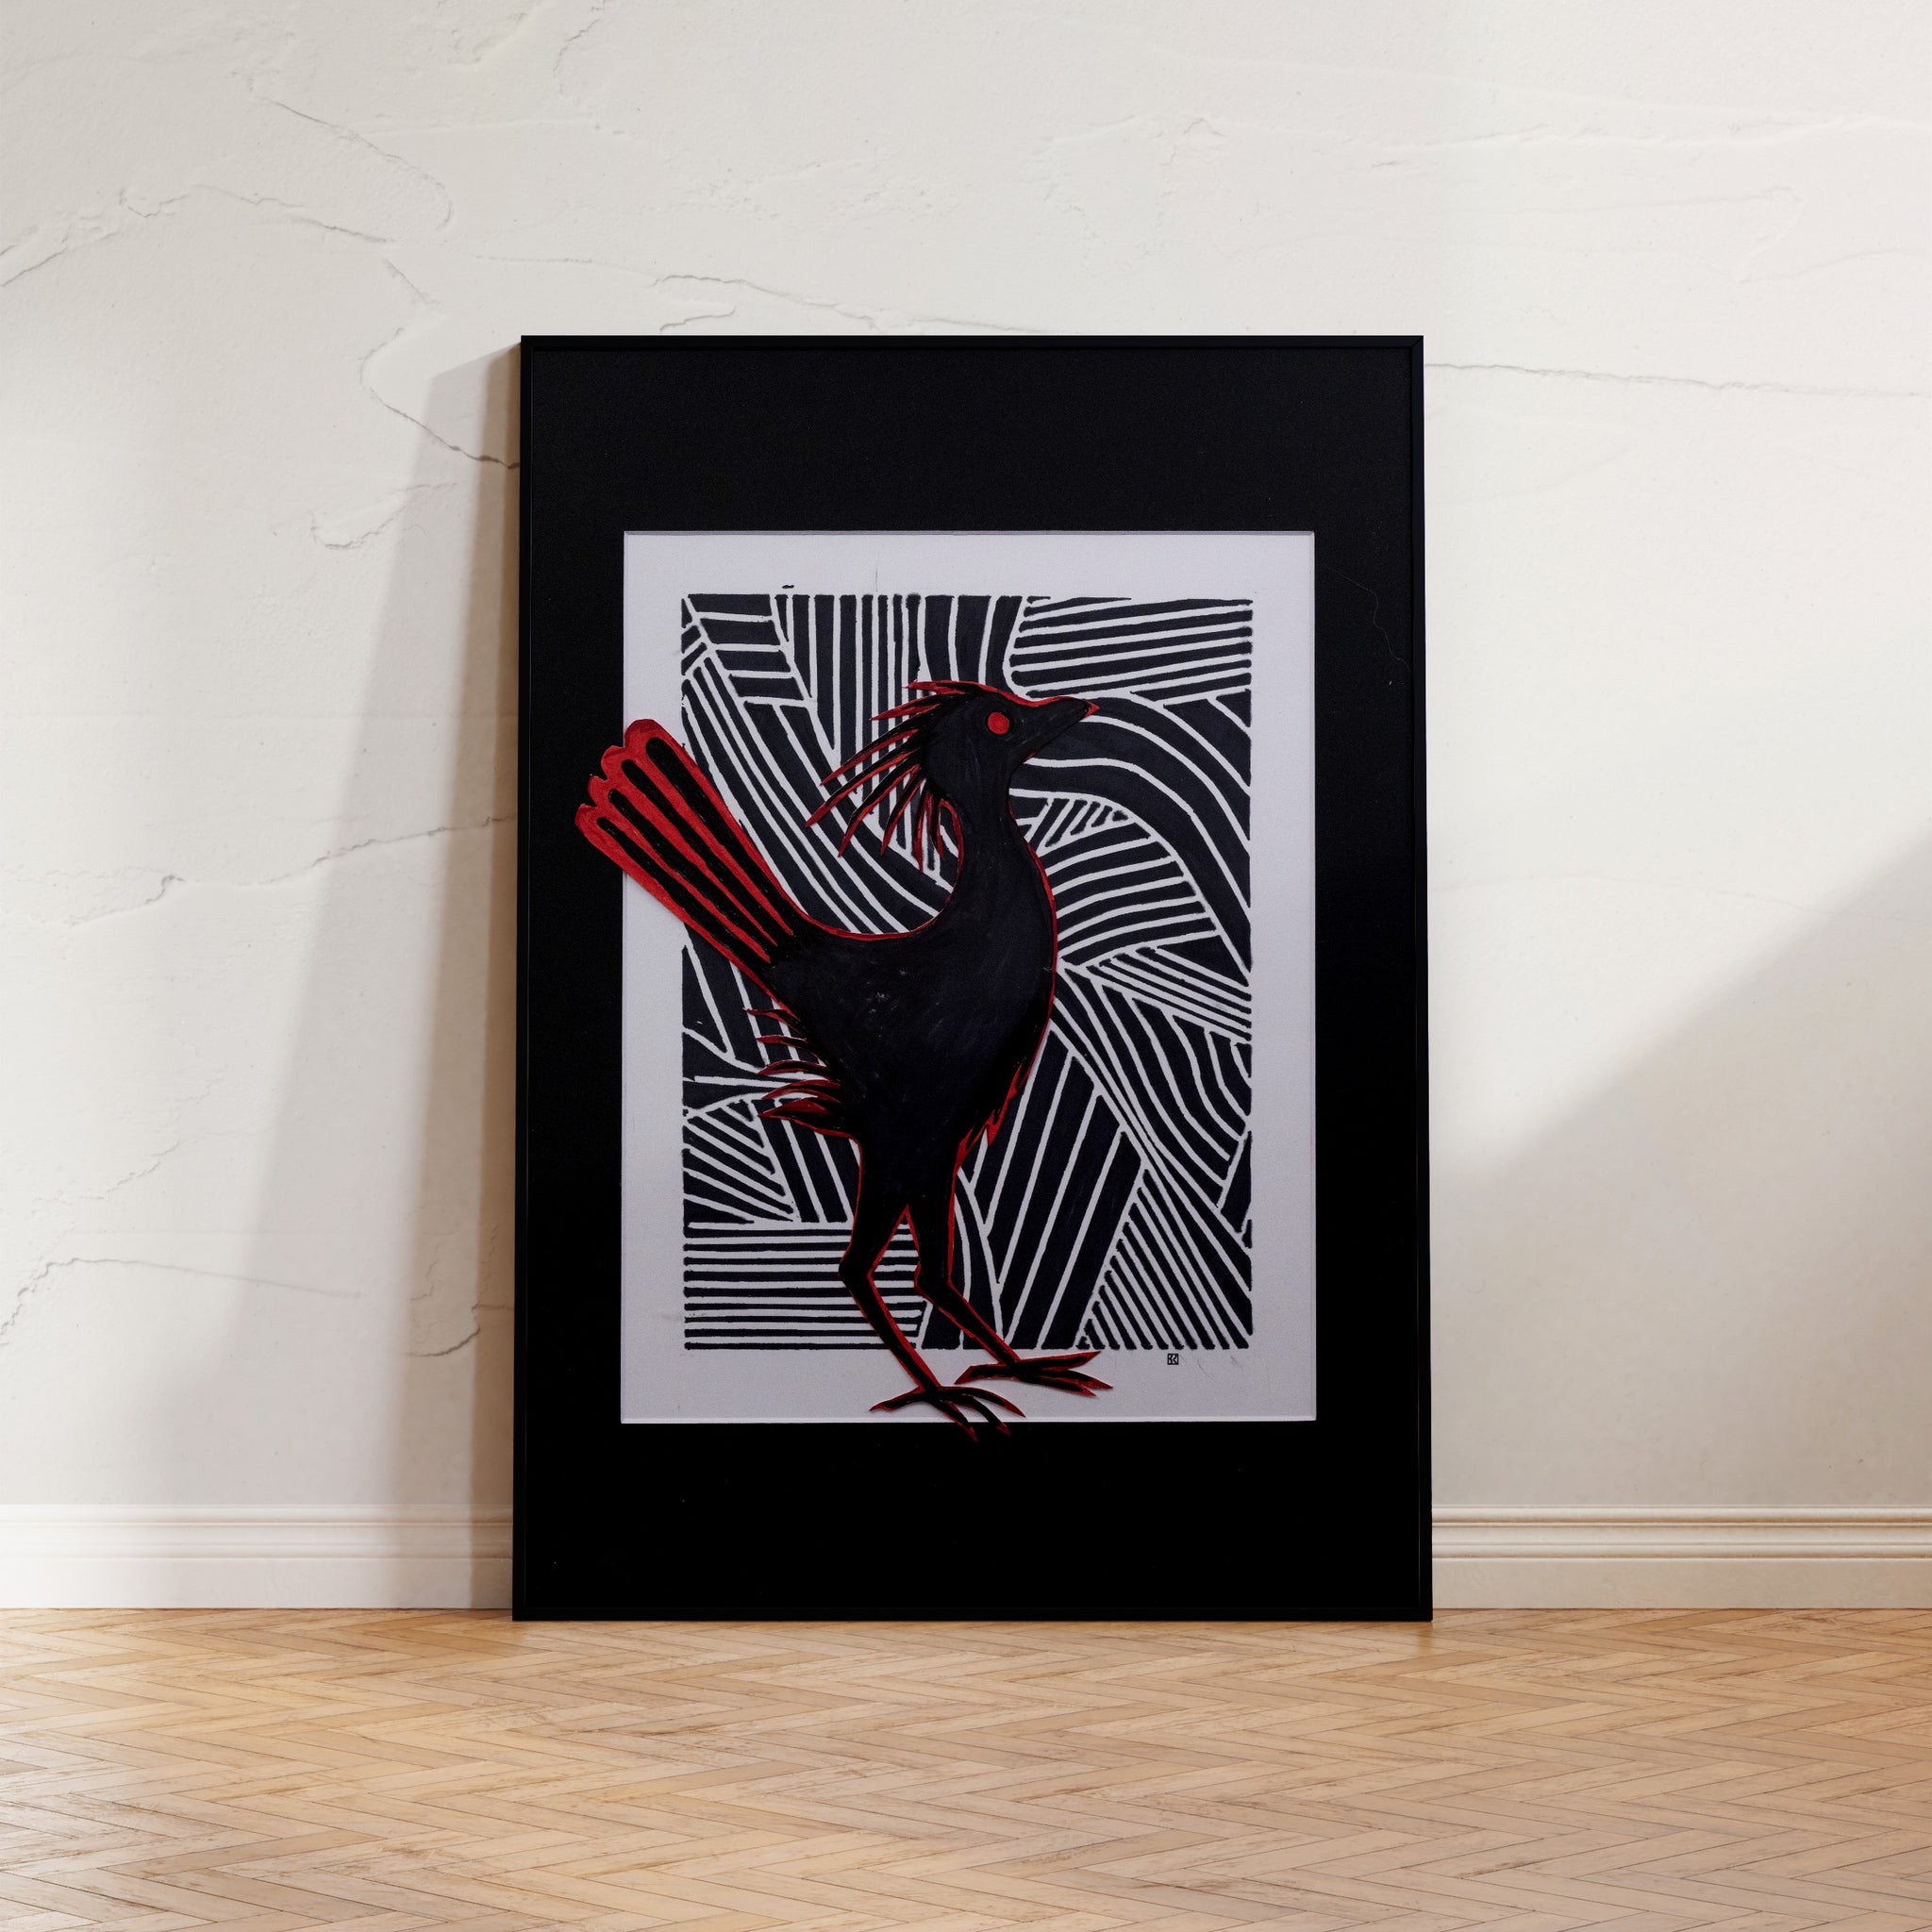 Black and white optical art painting of a swift roadrunner in motion, rendered in bold, energetic lines, celebrating speed and agility.